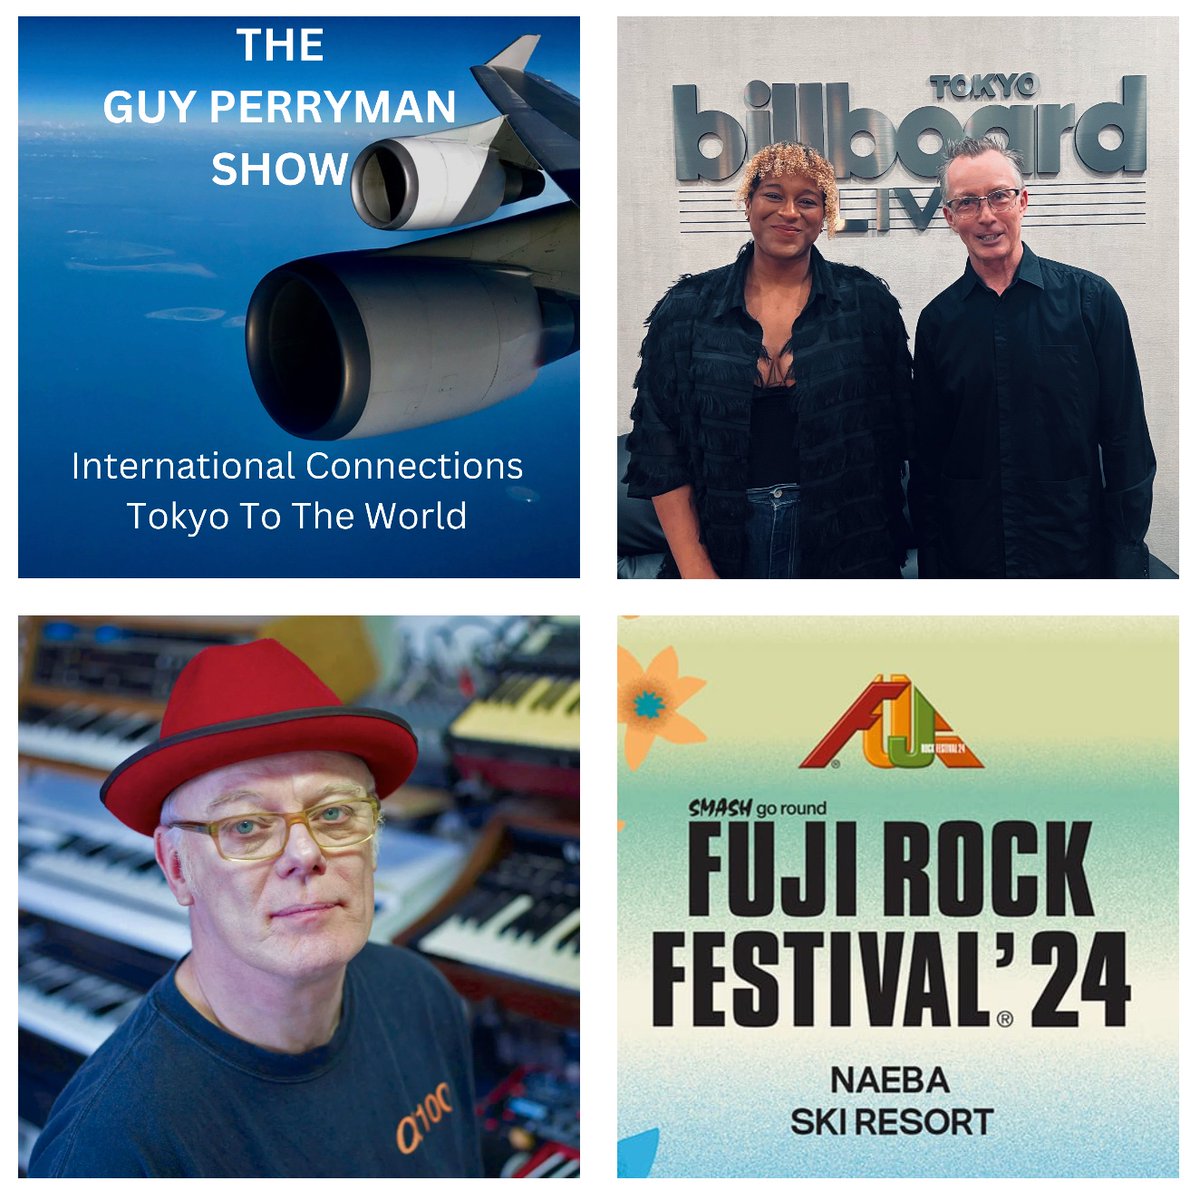 A day to enjoy vivid friends and events including multi-talented L'Rain, keyboardist Morgan Fisher, good news for @fujirock_jp fans, and more all with the music to match!! #guyperryman GPS @InterFM897 Fri 5/24 On air interfm.co.jp On demand mixcloud.com/GuyPerryman/